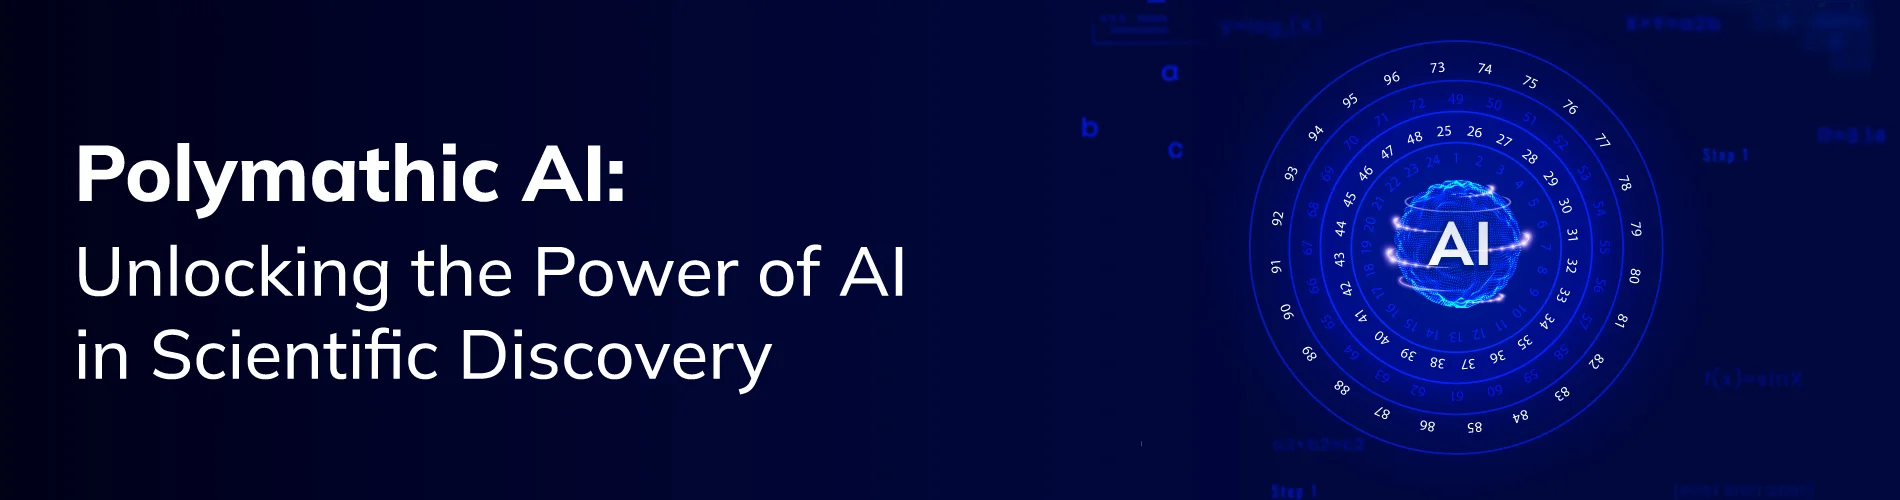 Polymathic AI: Unlocking the Power of AI in Scientific Discovery